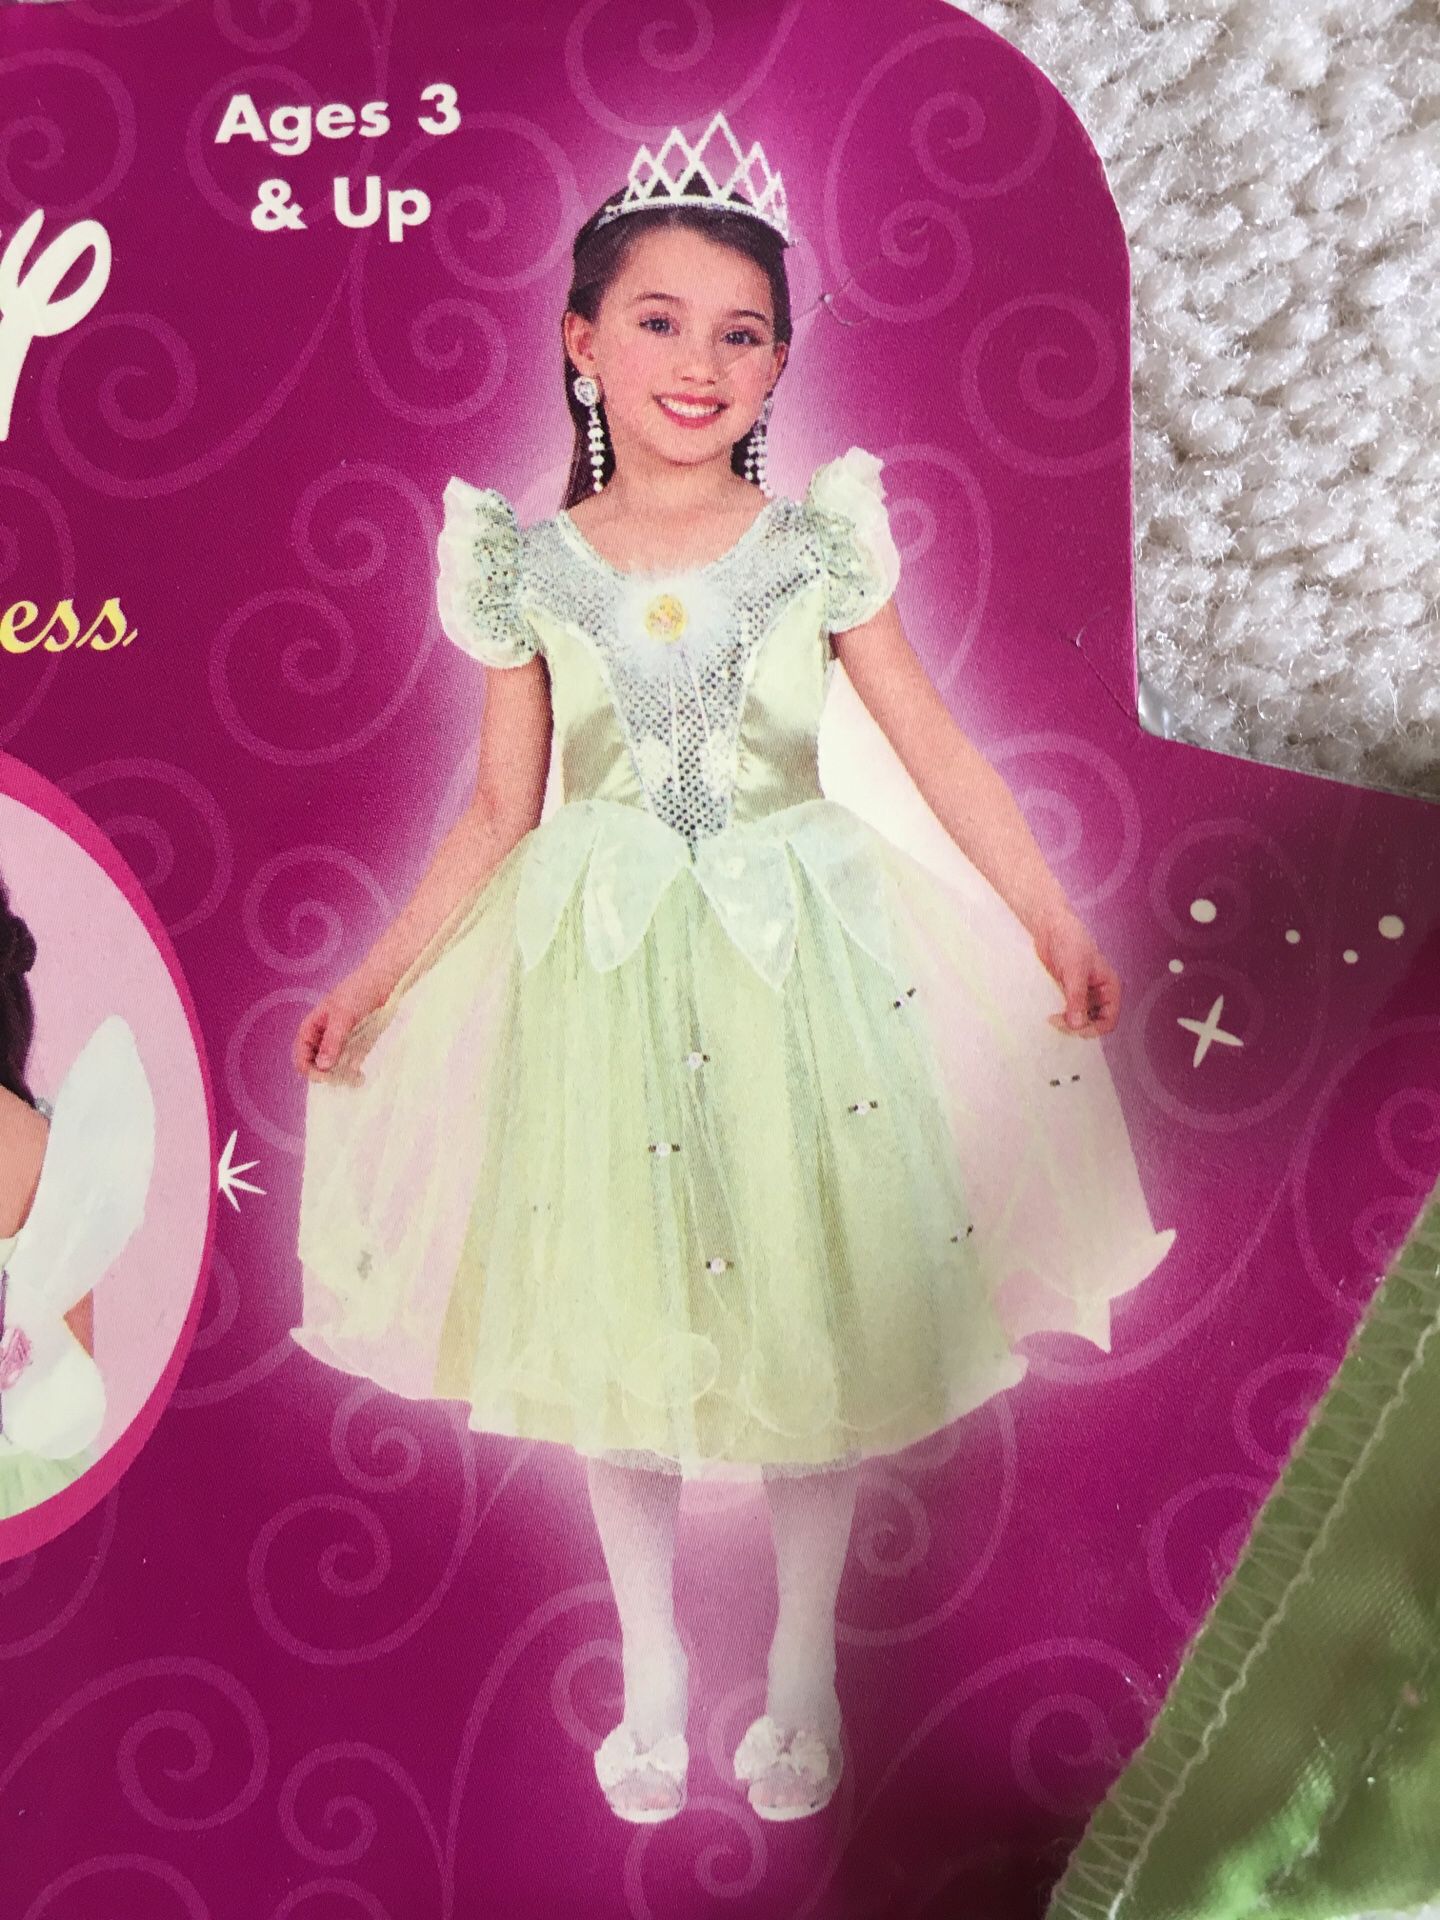 Disney Deluxe Tinkerbell dress. Ages 3 and up